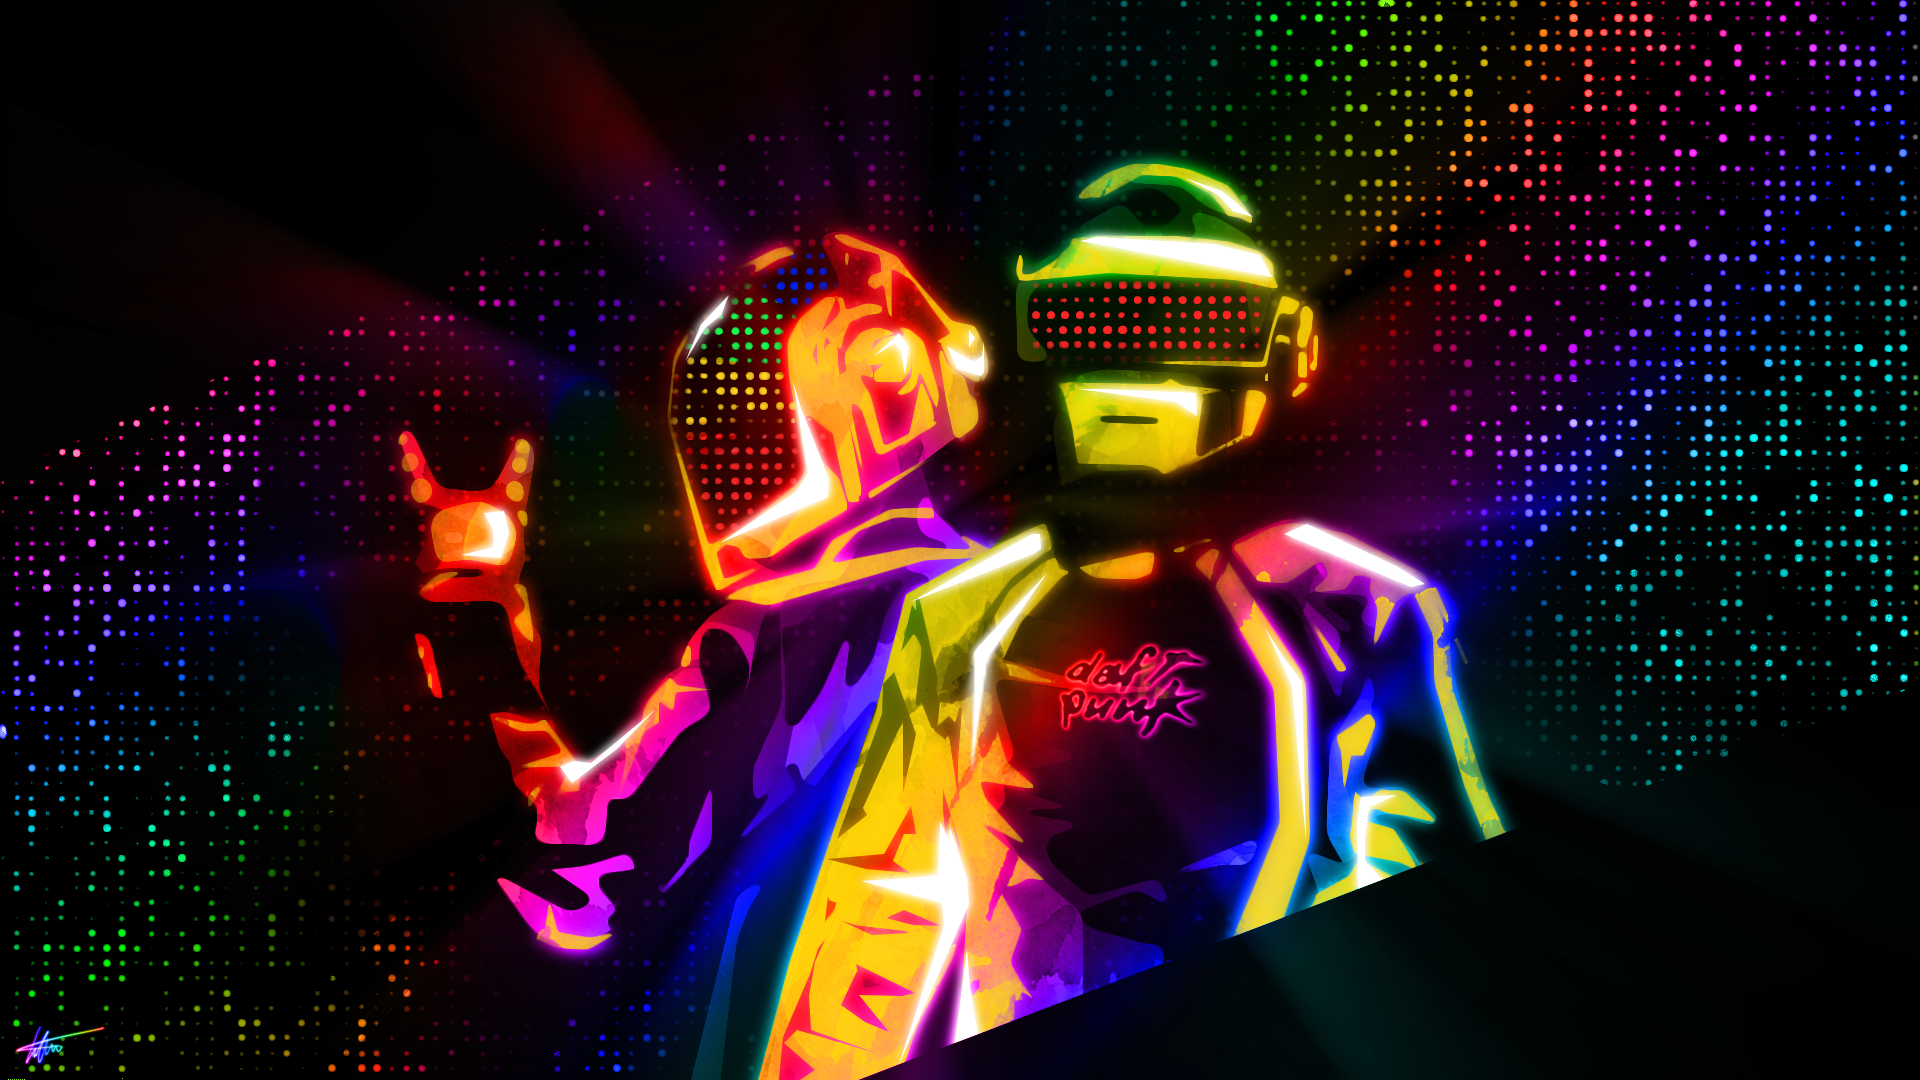 Download Daft Punk Wallpaper Collection - Download Page